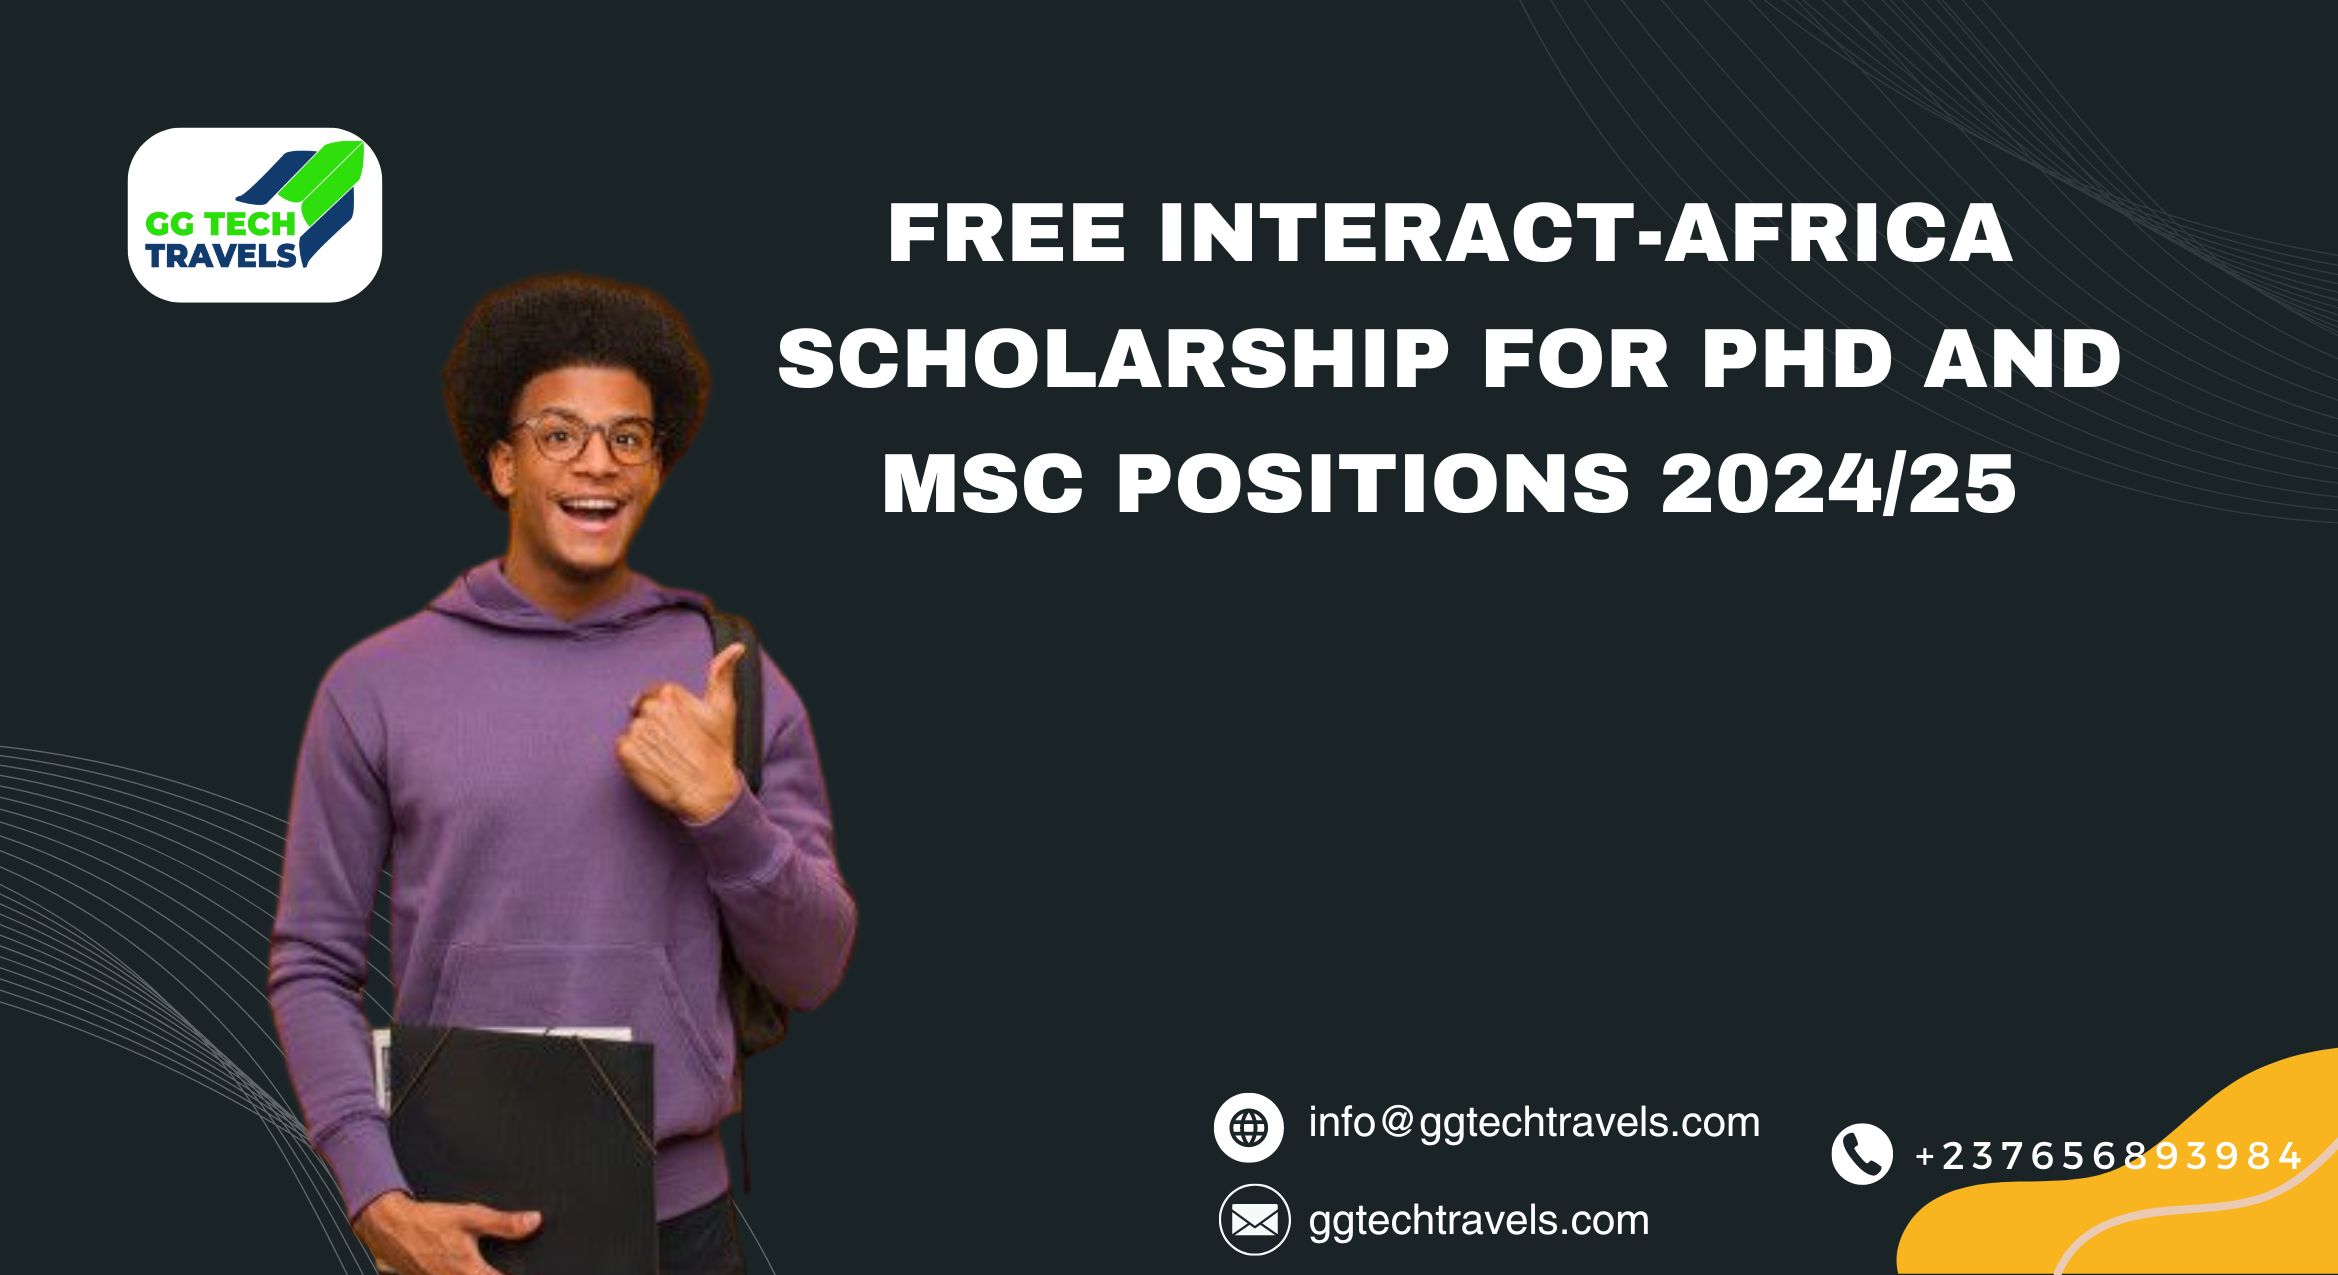 Free INTERACT-Africa Scholarship for PhD and MSc positions 2024/25